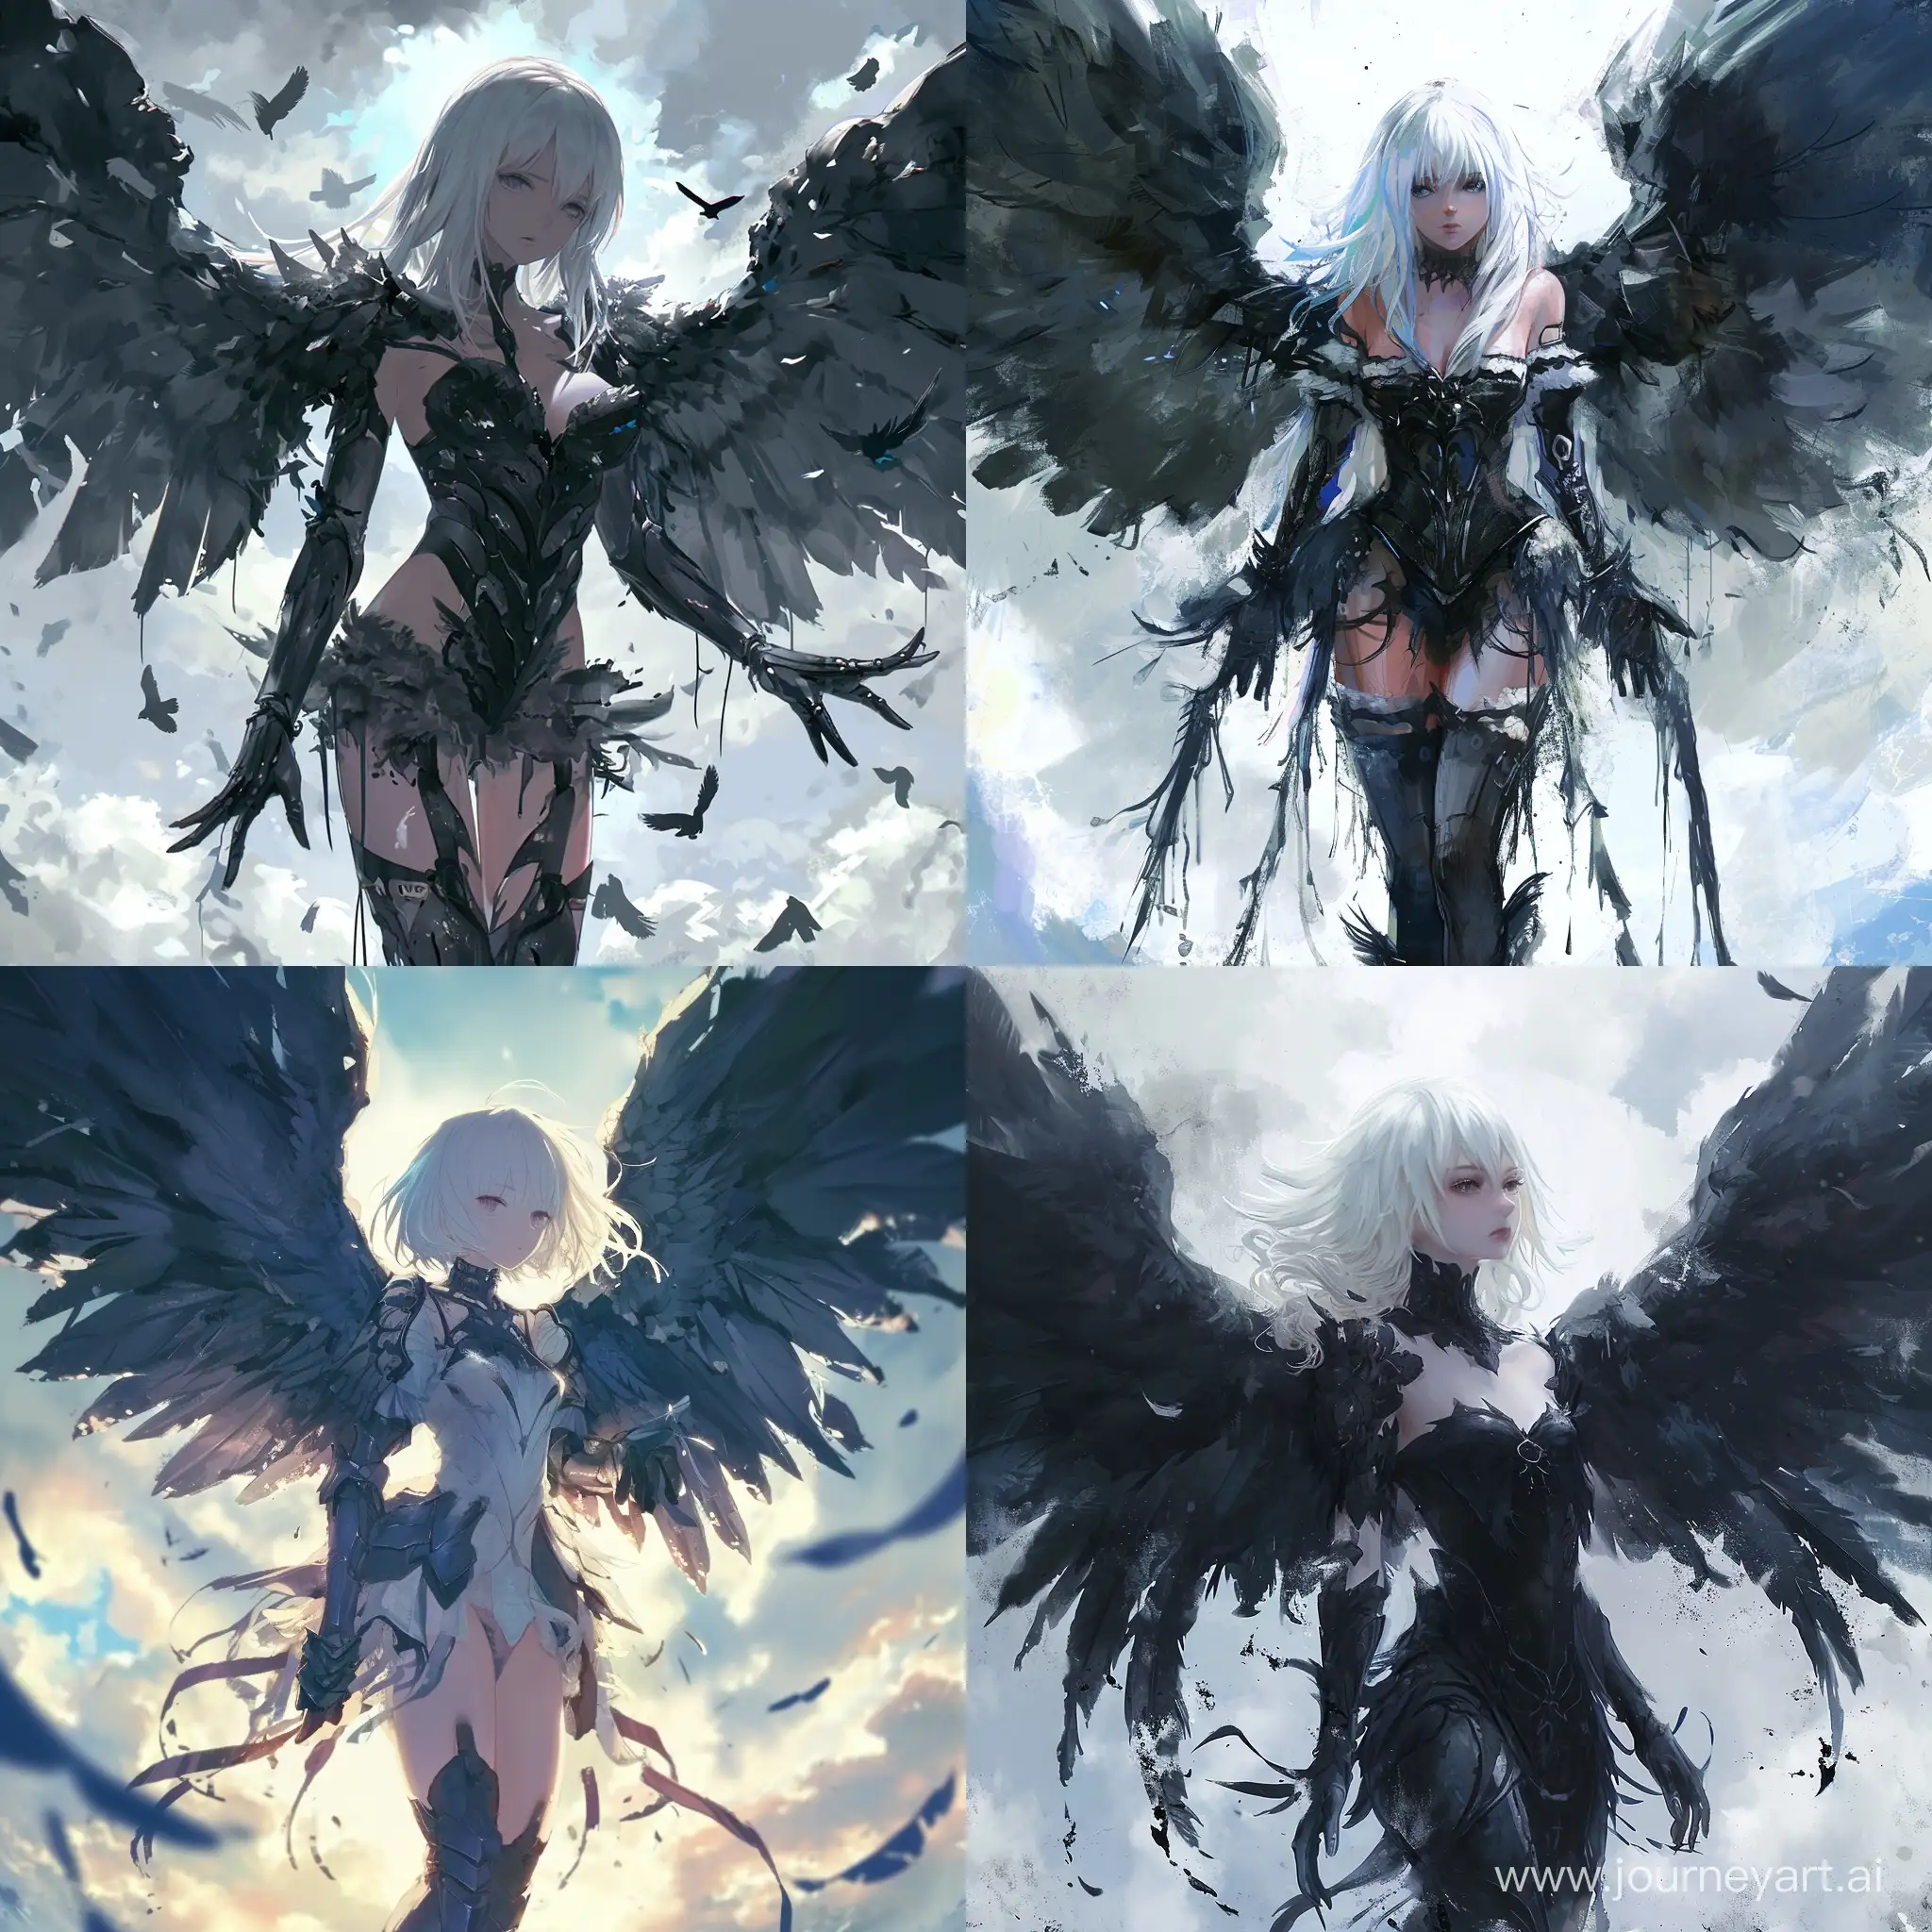 Anime::1.3 dark angel with large black wings, standing in front of a sky background with white and blue hues, the anime angel has white hair and is wearing a armor-like outfit, the wings are spread out and there are black paint drips trailing from them